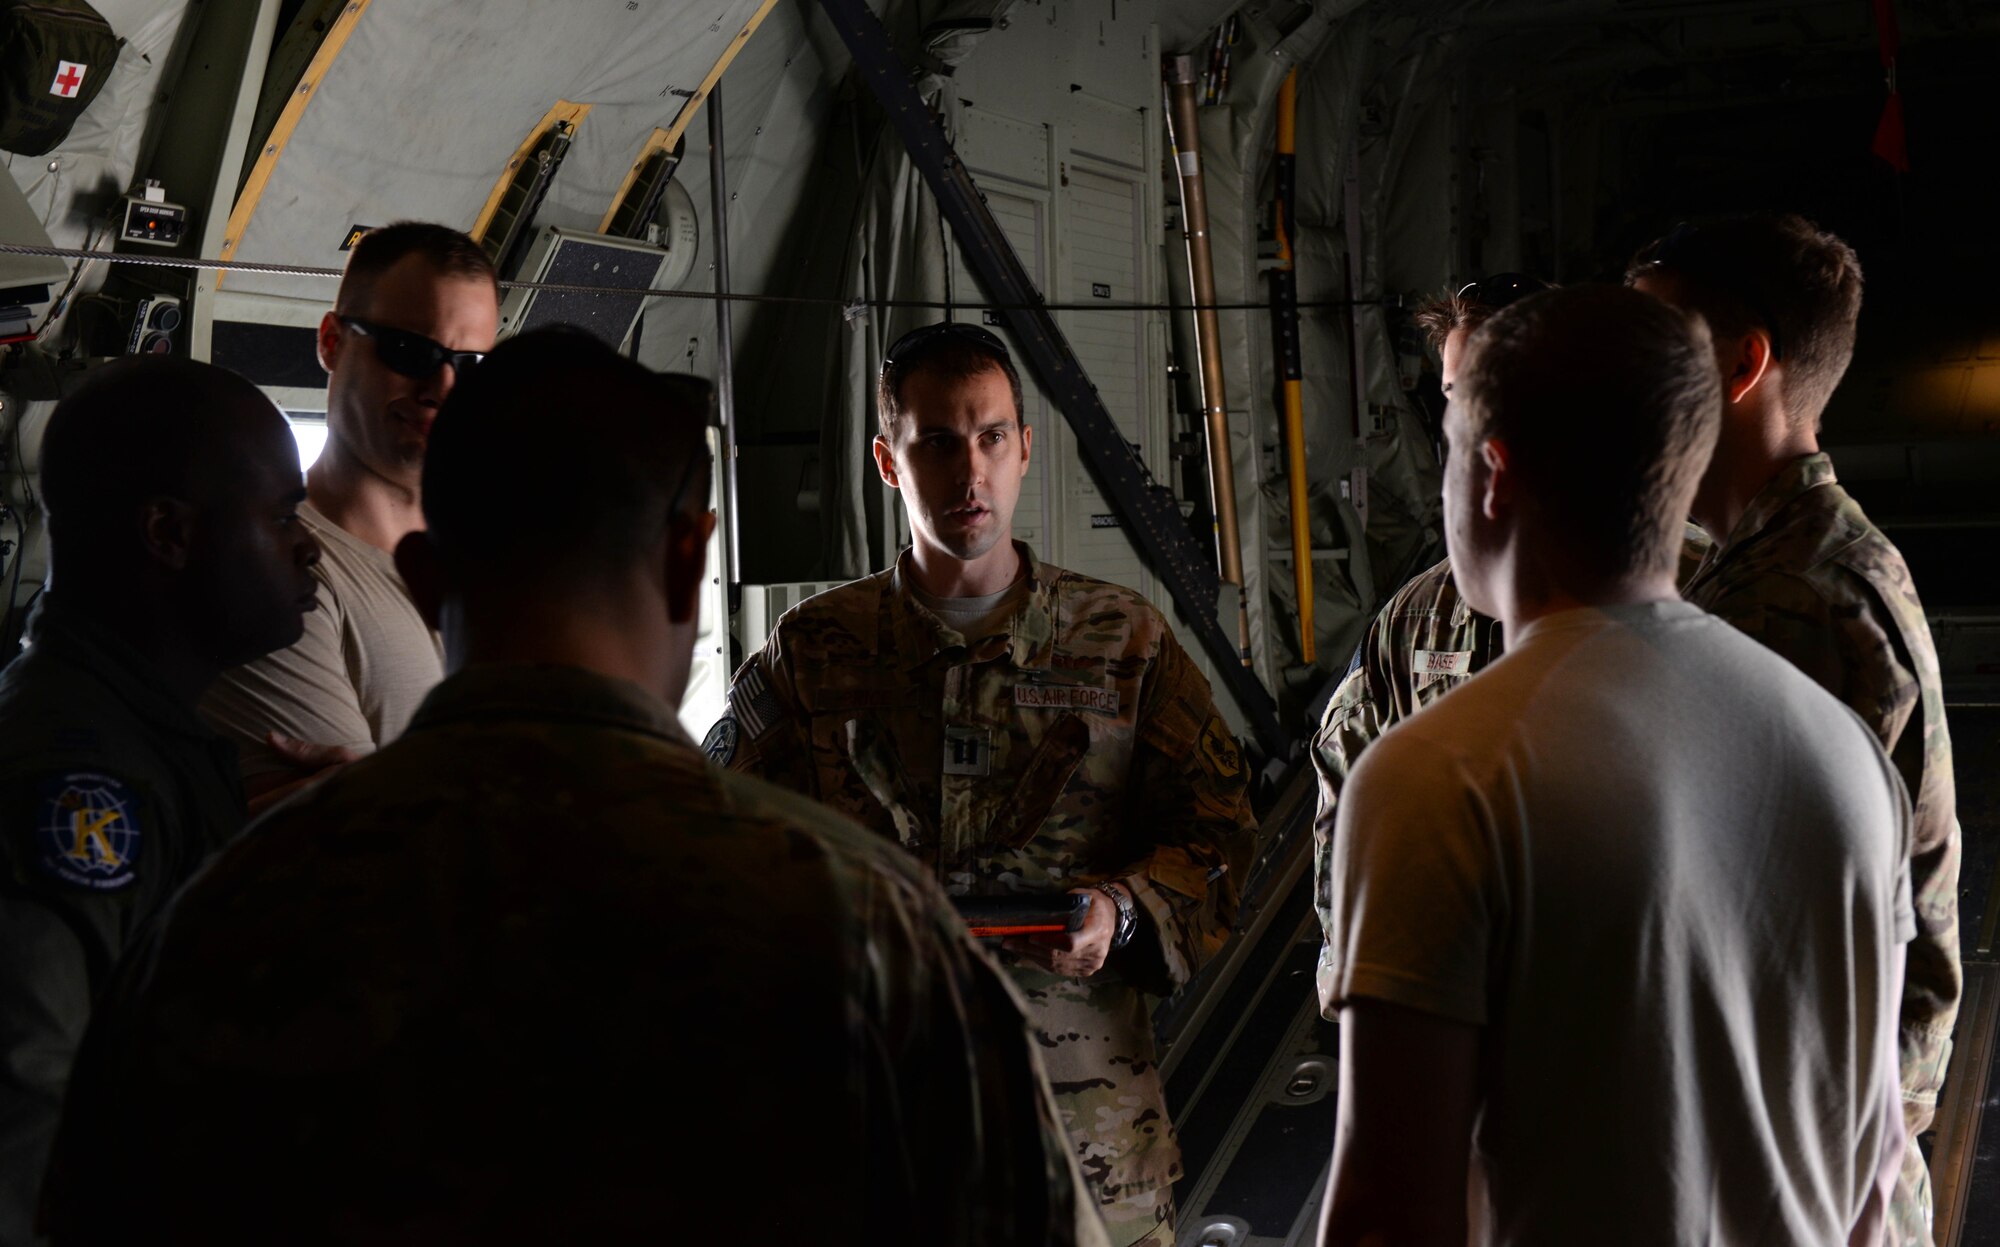 Capt. Carl Price, a C-130 Super Hercules pilot assigned to the 71st Rescue Squadron, Moody Air Force Base, Ga., briefs his crew before take-off at Ellsworth AFB, S.D., June 28, 2017. Price and his crew trained with other Air Force units in realistic air-to-air, air-to-ground and combat search and rescue missions. (U.S. Air Force photo by Airman Nicolas Z. Erwin)